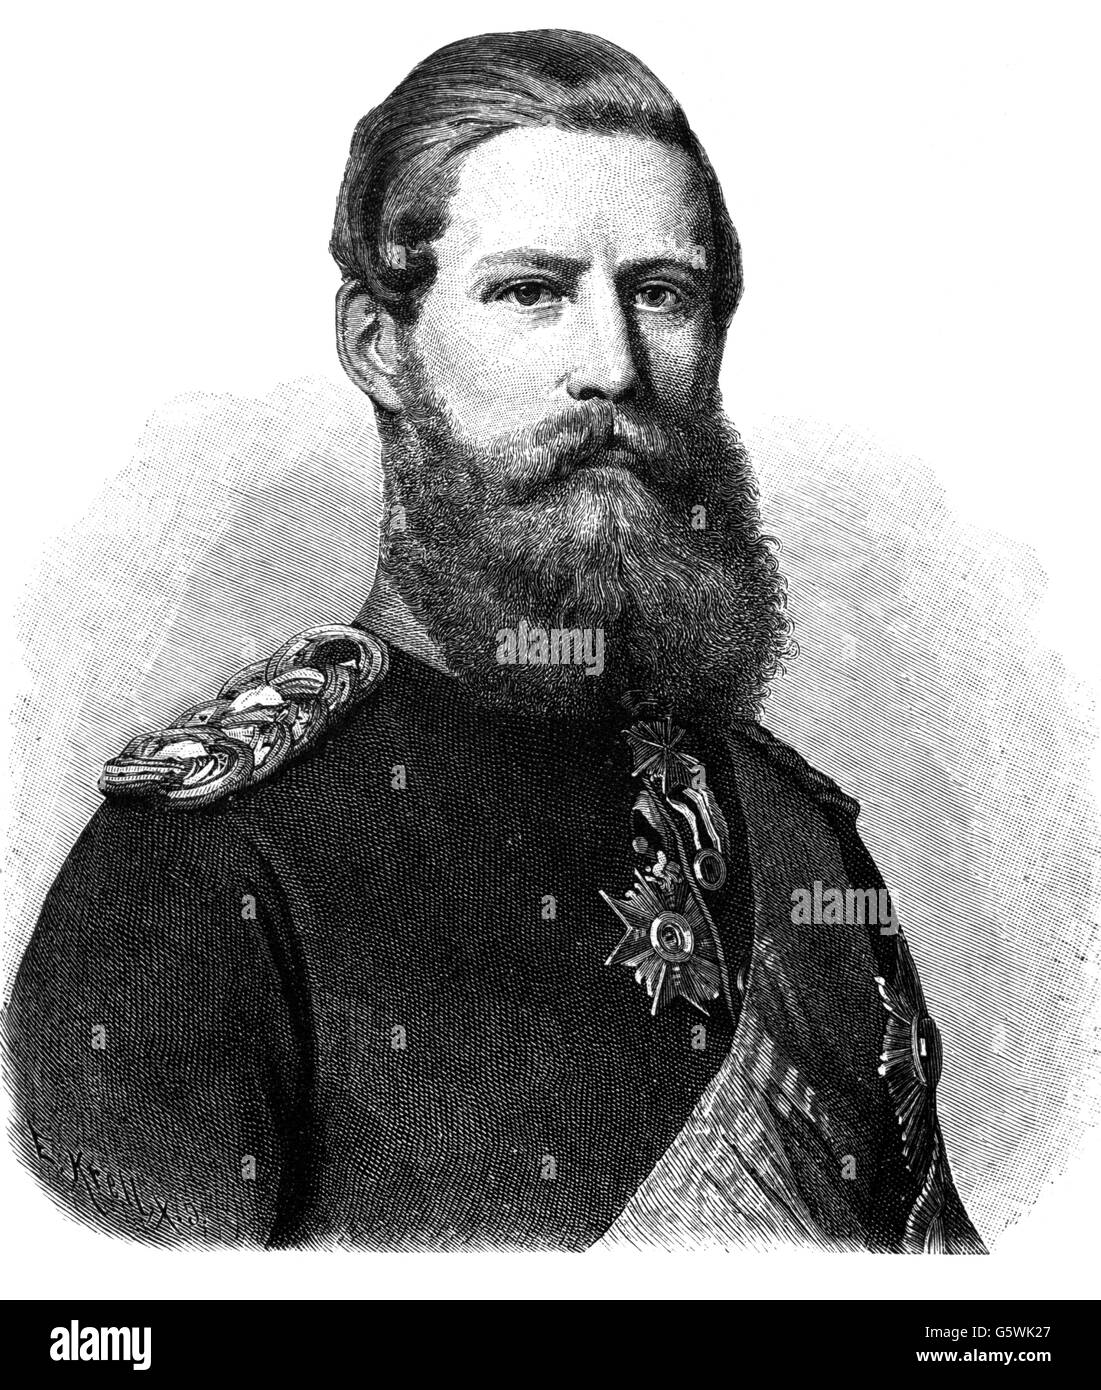 Frederick III, 18.10.1831 - 15.6.1888, German Emperor 9.3. - 15.6.1888, portrait, wood engraving after painting by Winterhalter, circa 1869, Artist's Copyright has not to be cleared Stock Photo